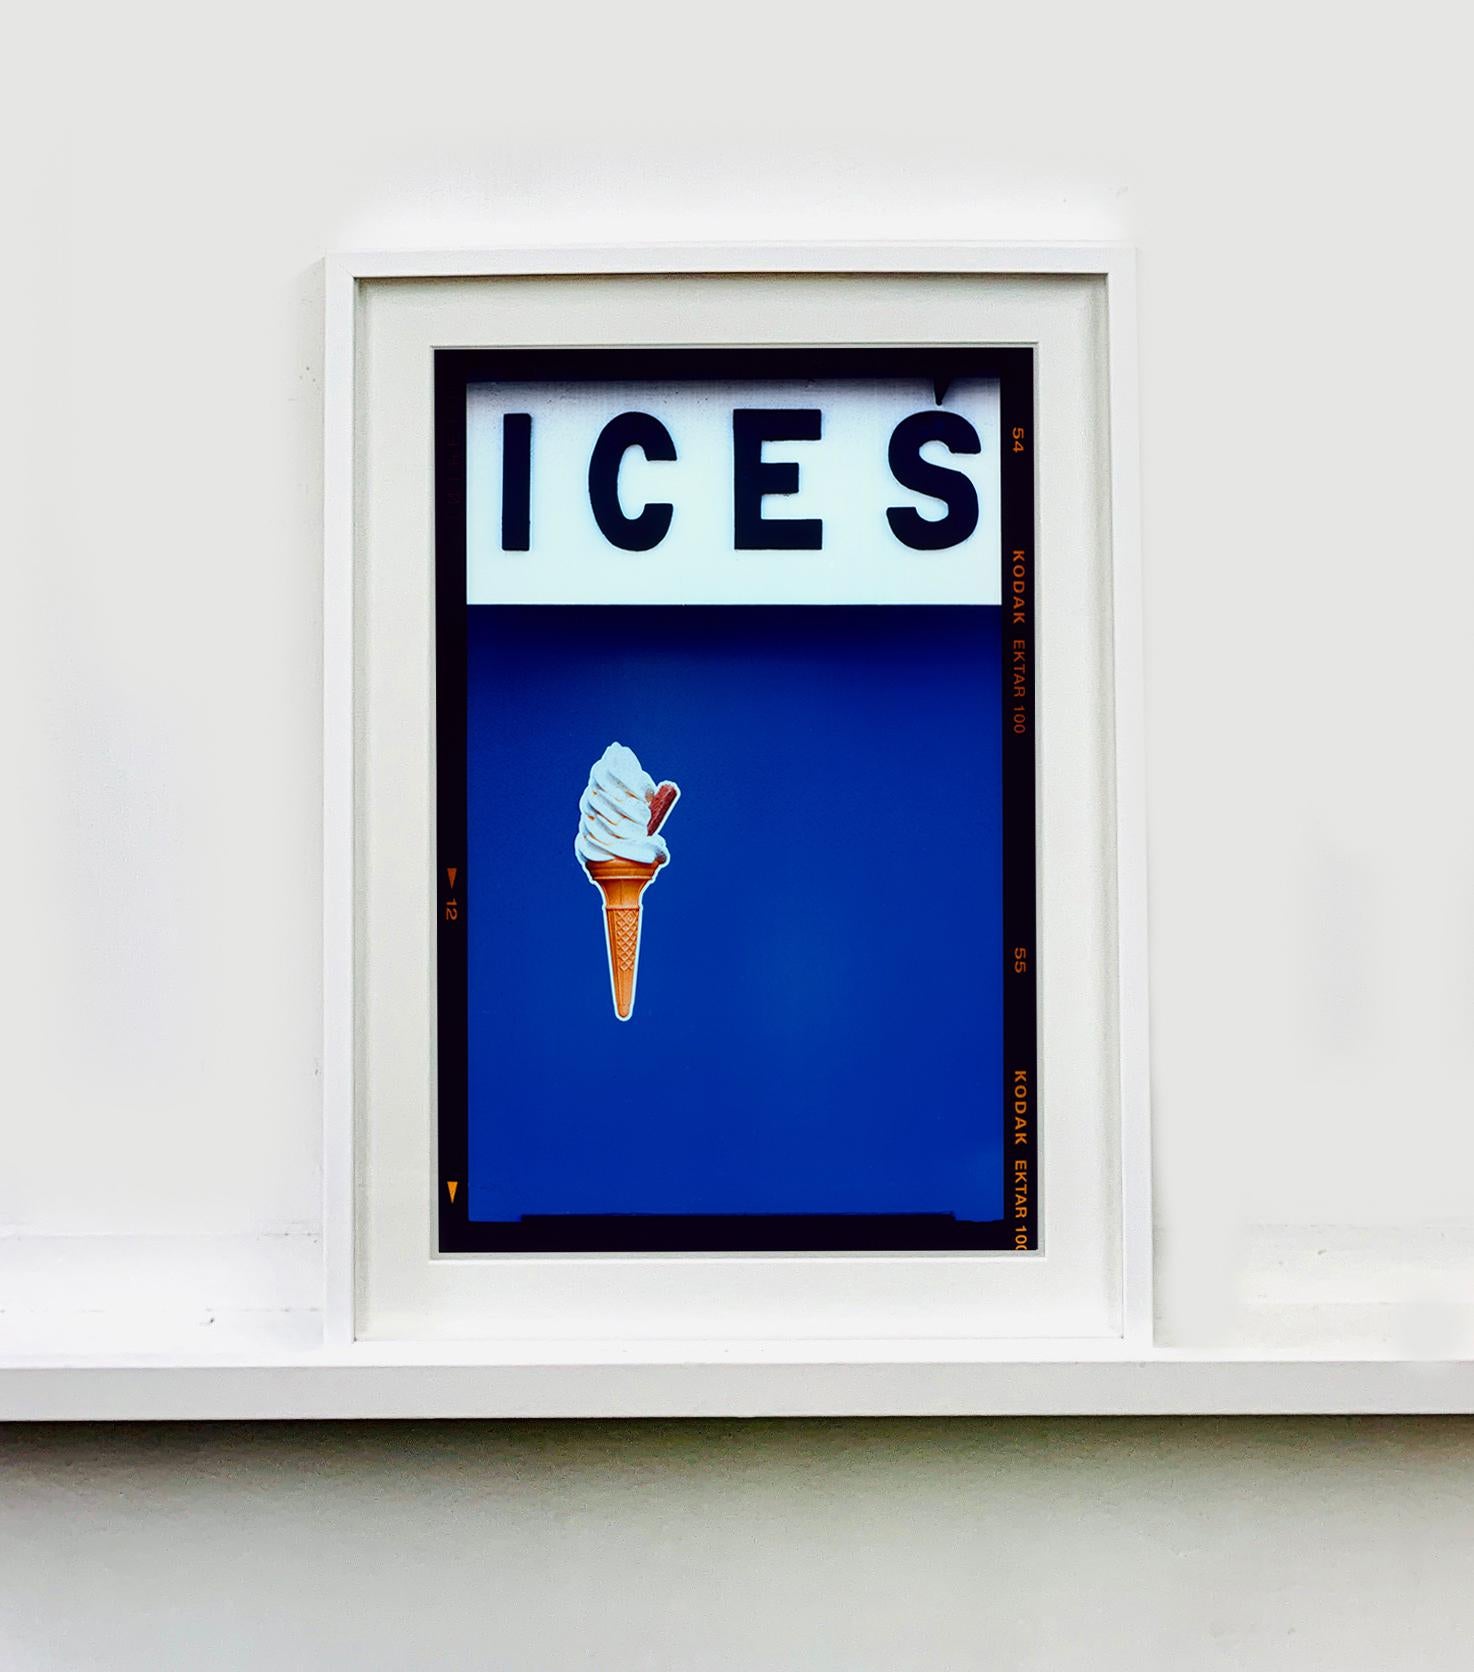 Ices, Bexhill-on-Sea - British seaside color photography 1